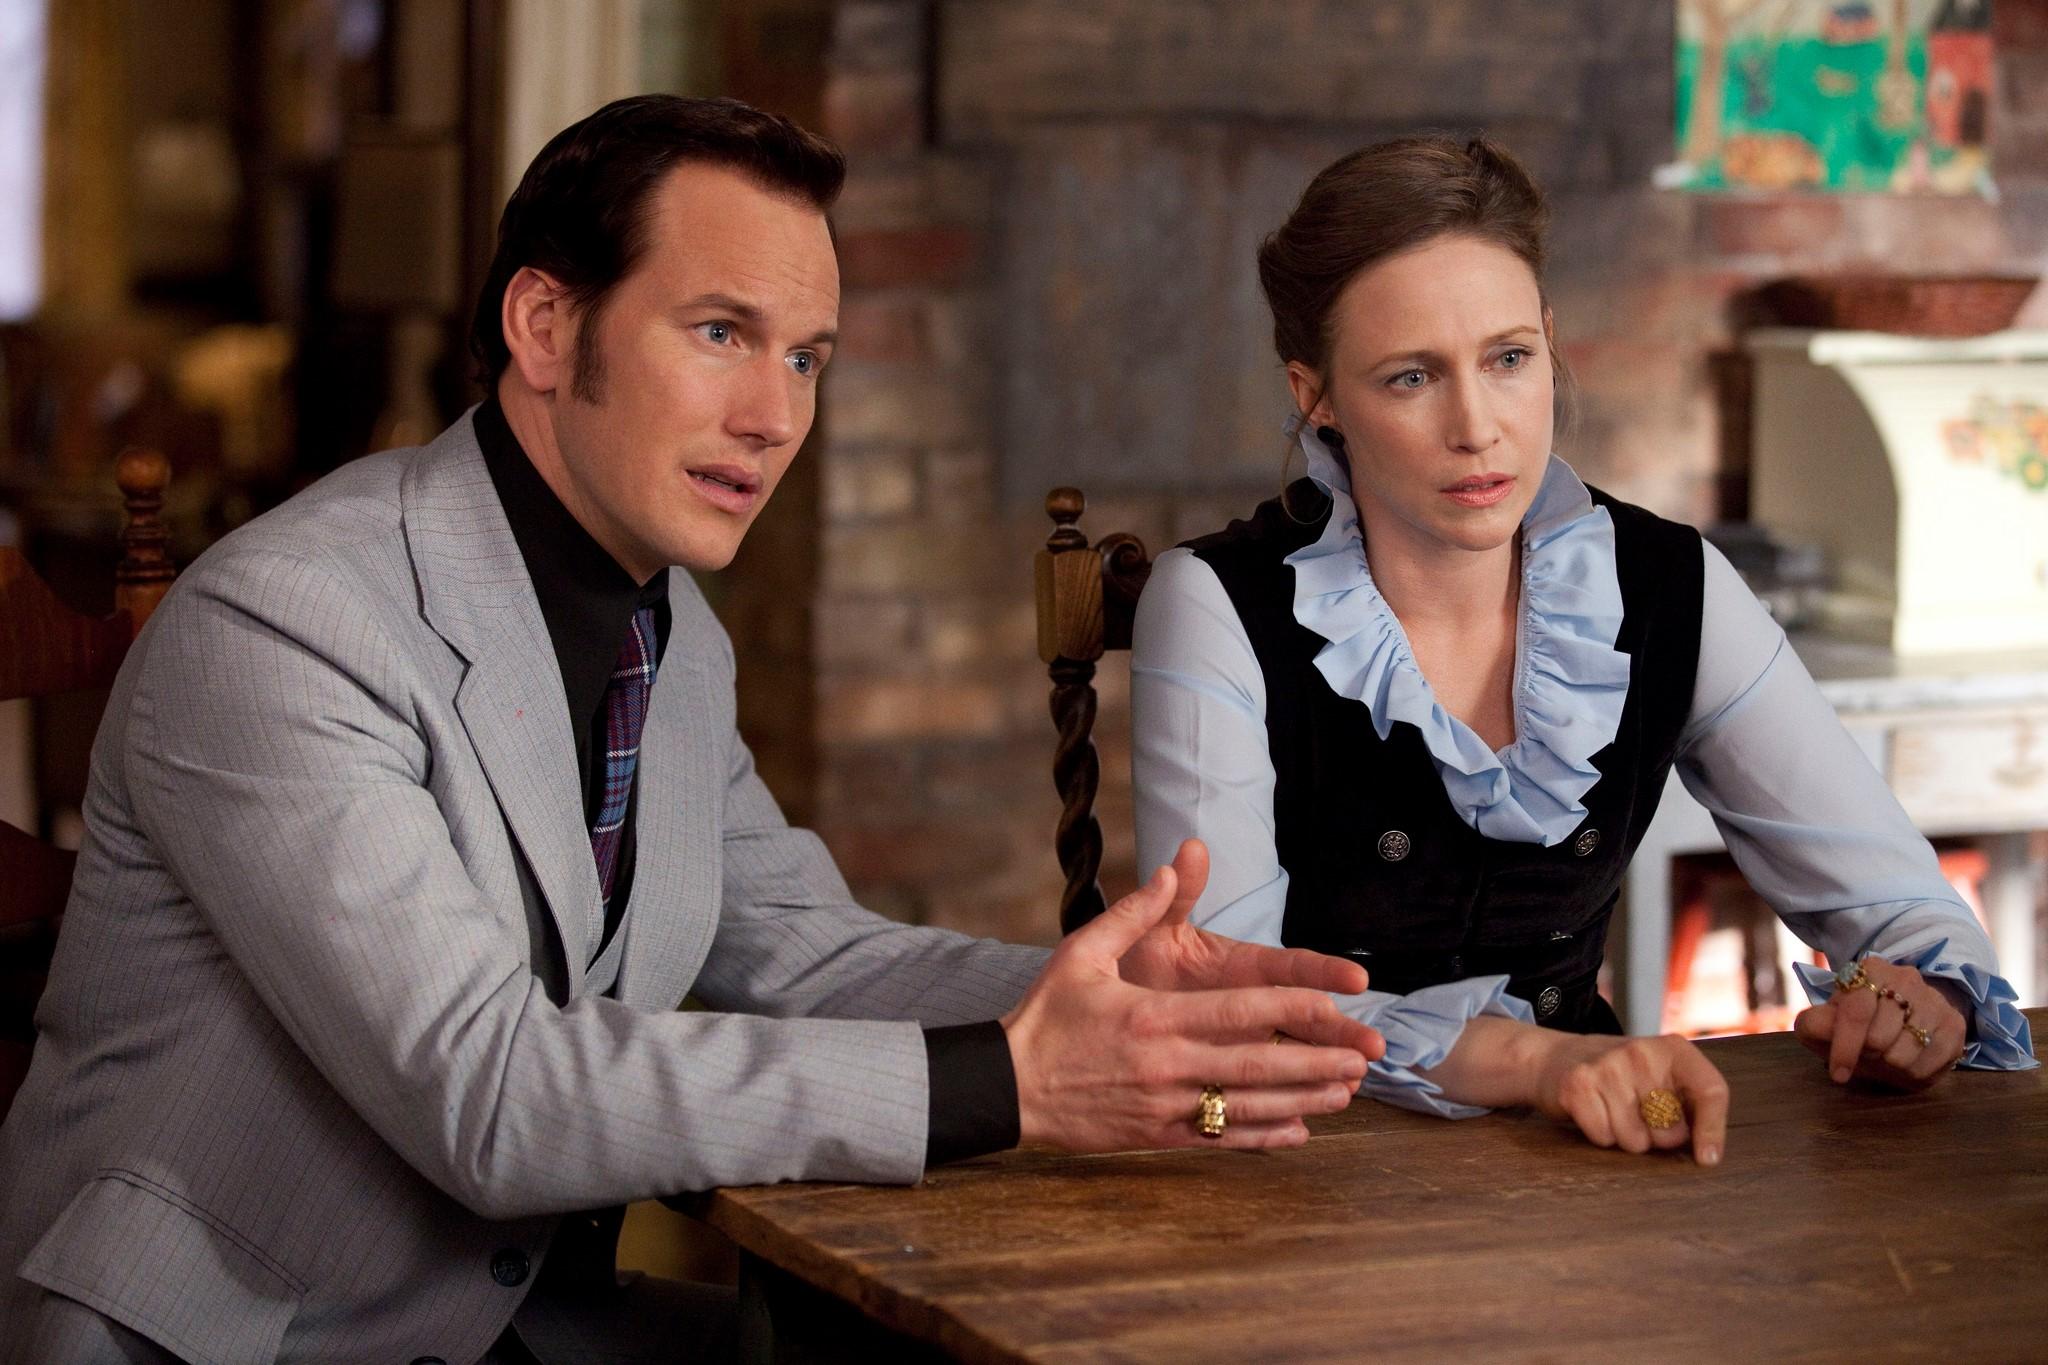 11. The Conjuring: The Devil Made Me Do It